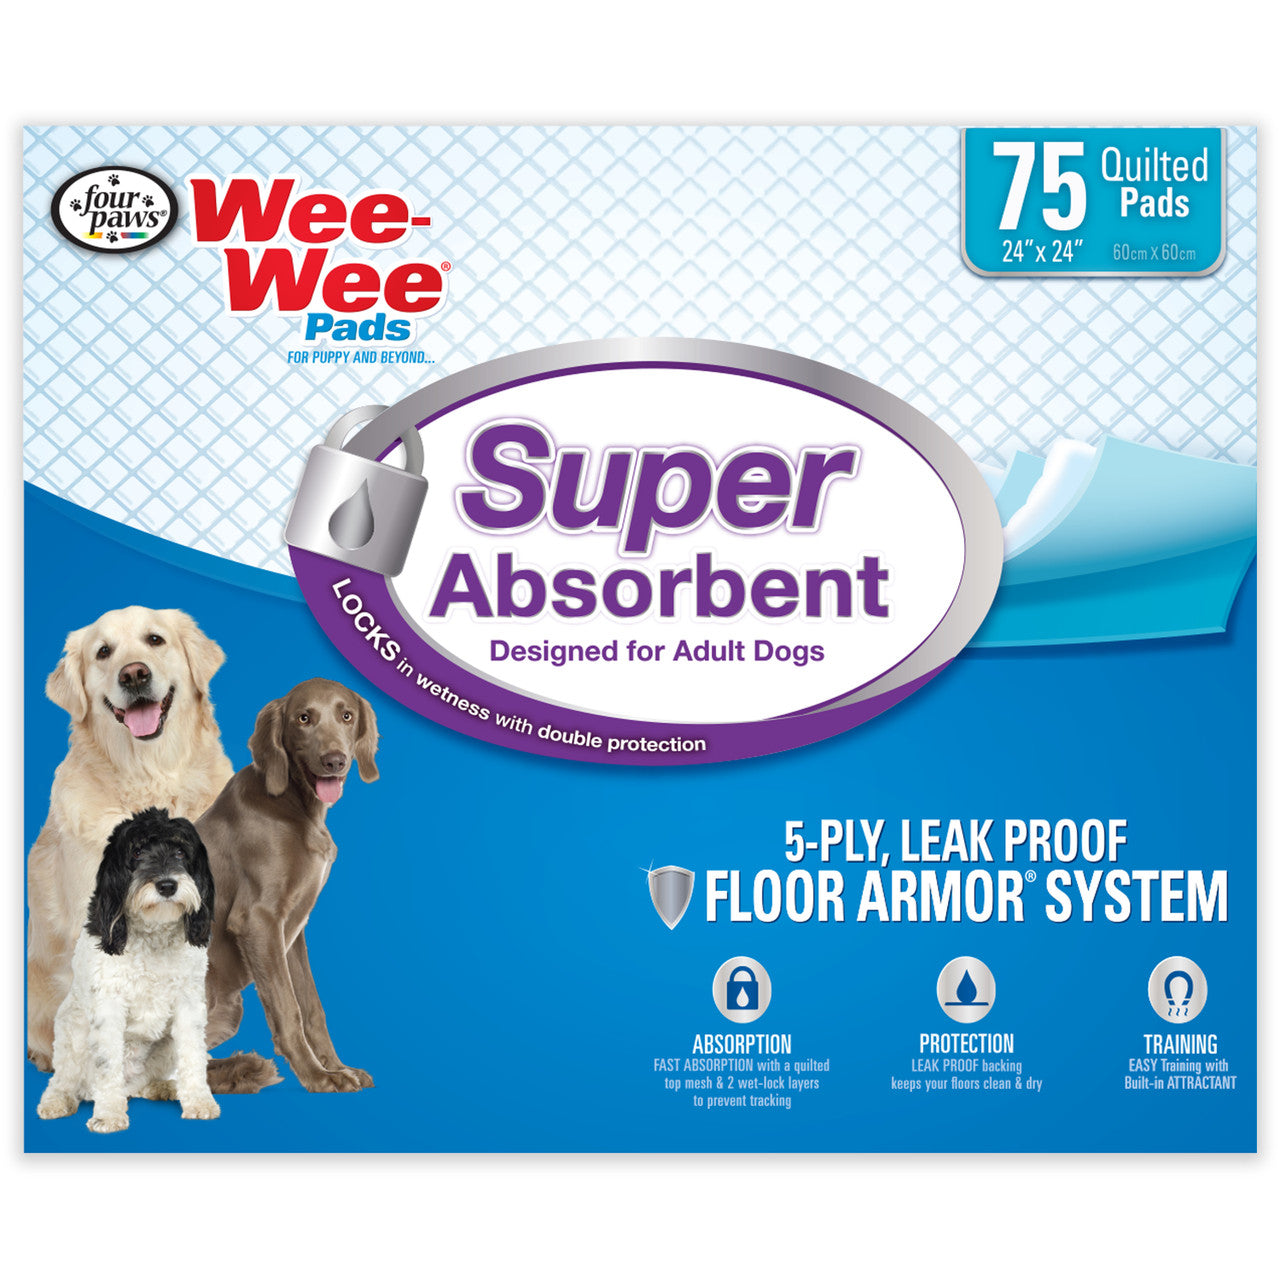 Four Paws Four Paws Wee-Wee Super Absorbent Pads for Dogs 75 Count